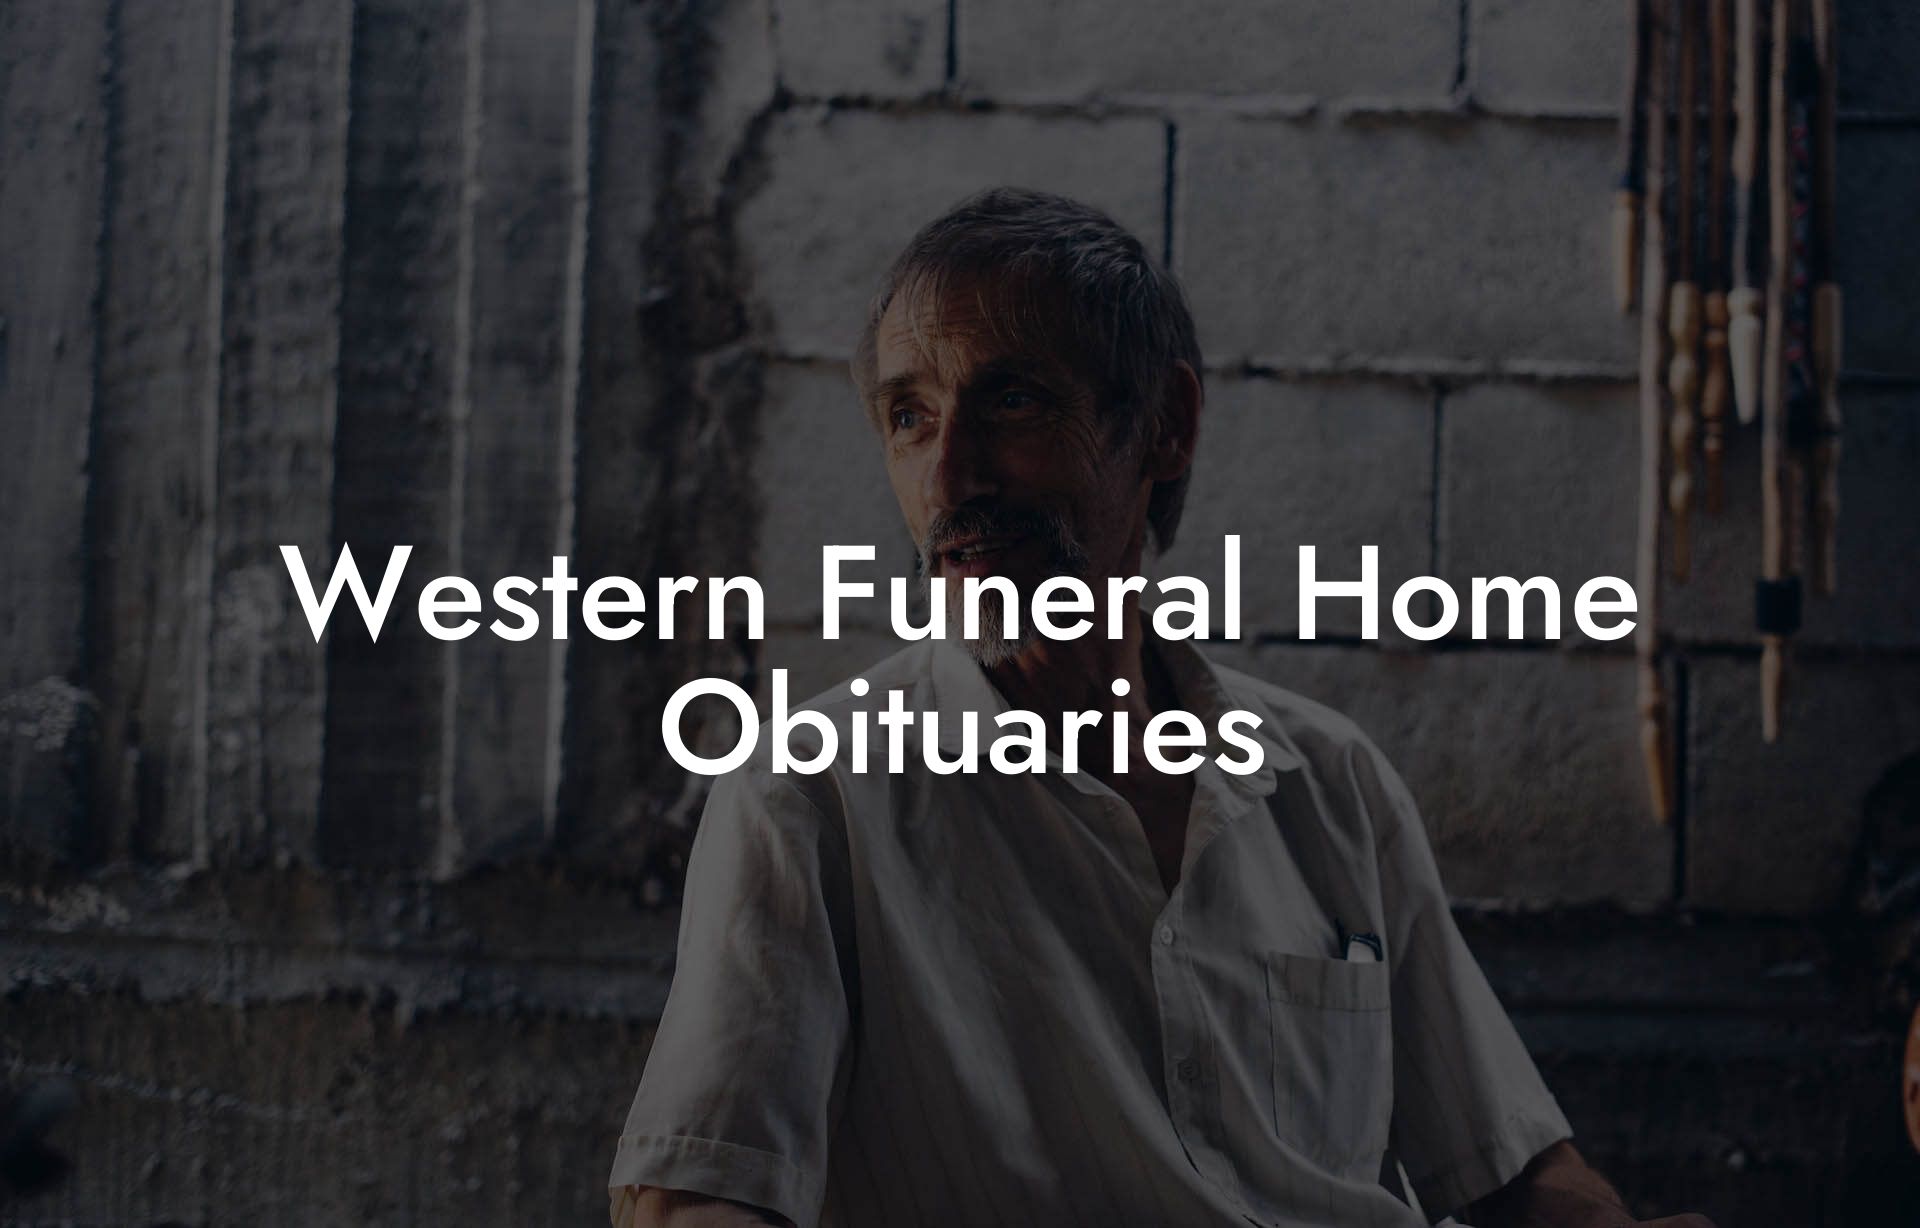 Western Funeral Home Obituaries